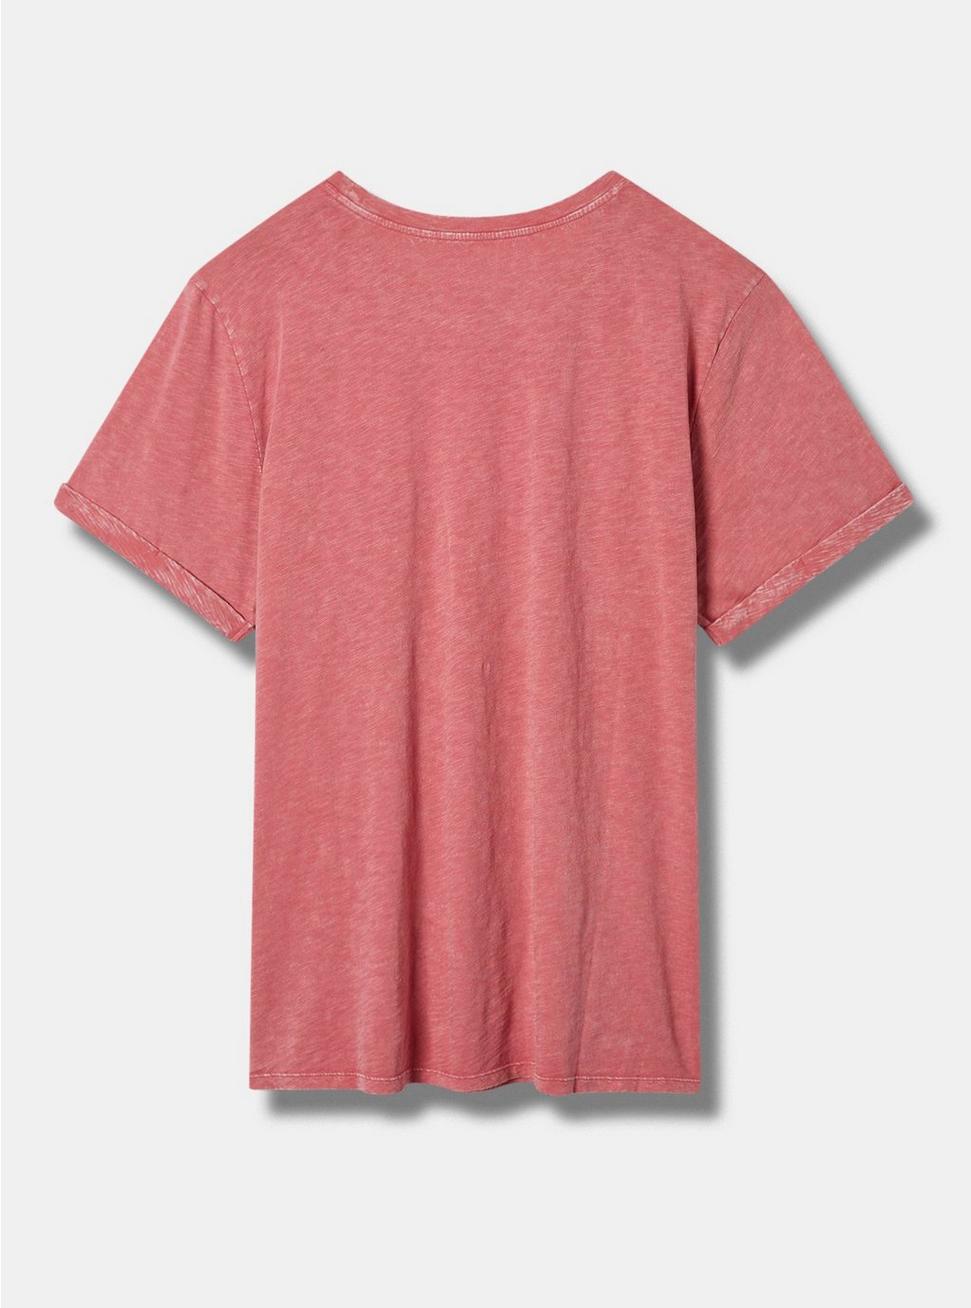 Plus Size Locally Grown Relaxed Fit Heritage Slub Crew Neck Roll Sleeve Tee, PINK WASH, alternate